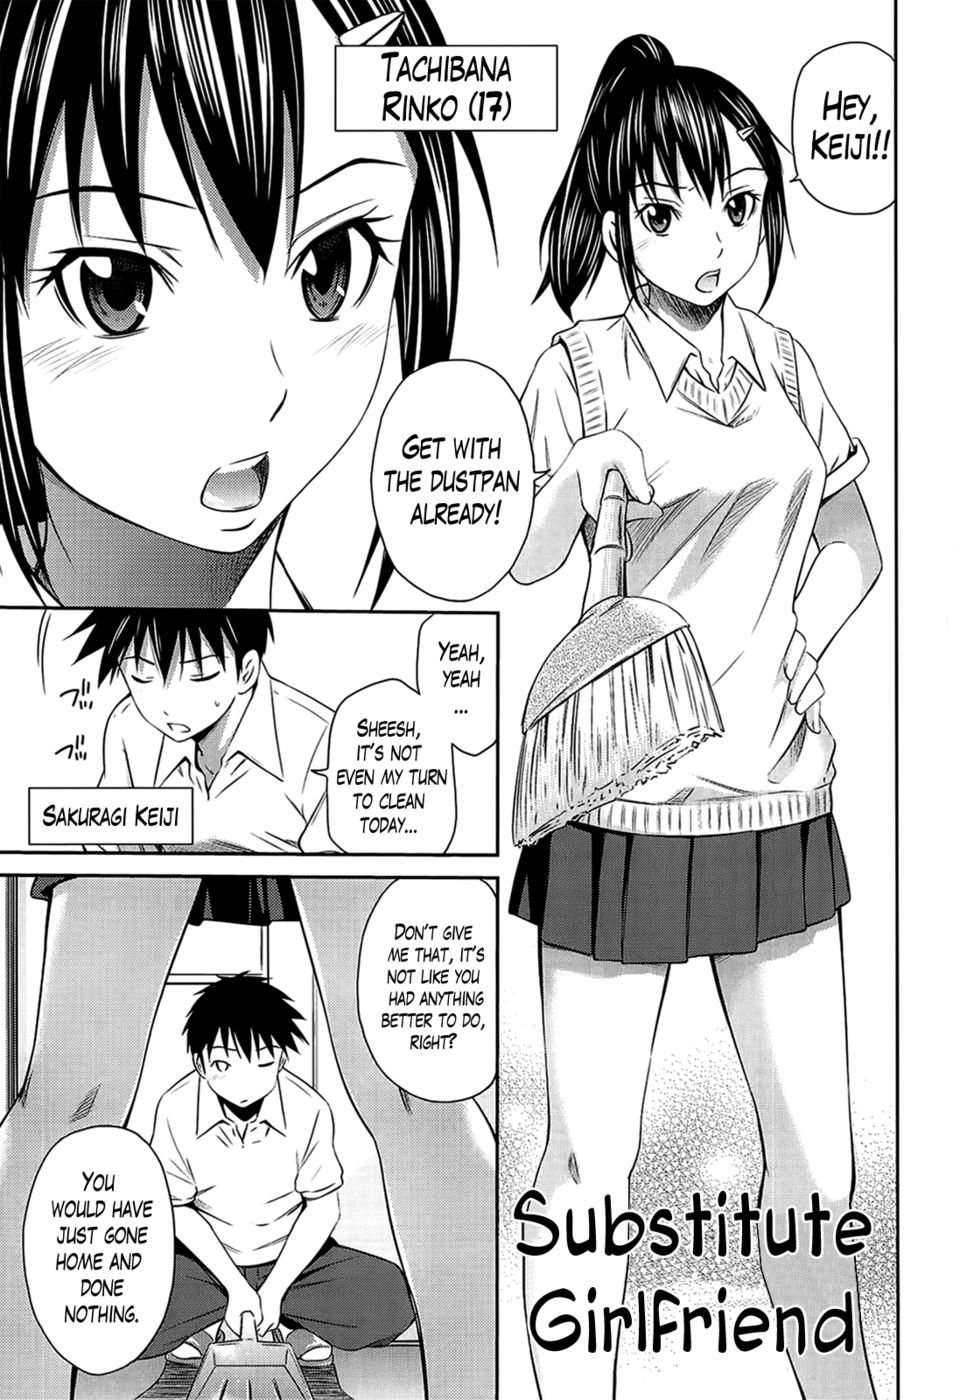 Manga Hentai Bahasa Indonesia - A Very Hot Middle-Chapter 4-Substitute GirlFriend-Hentai Manga Hentai Comic  - Online porn video at mobile